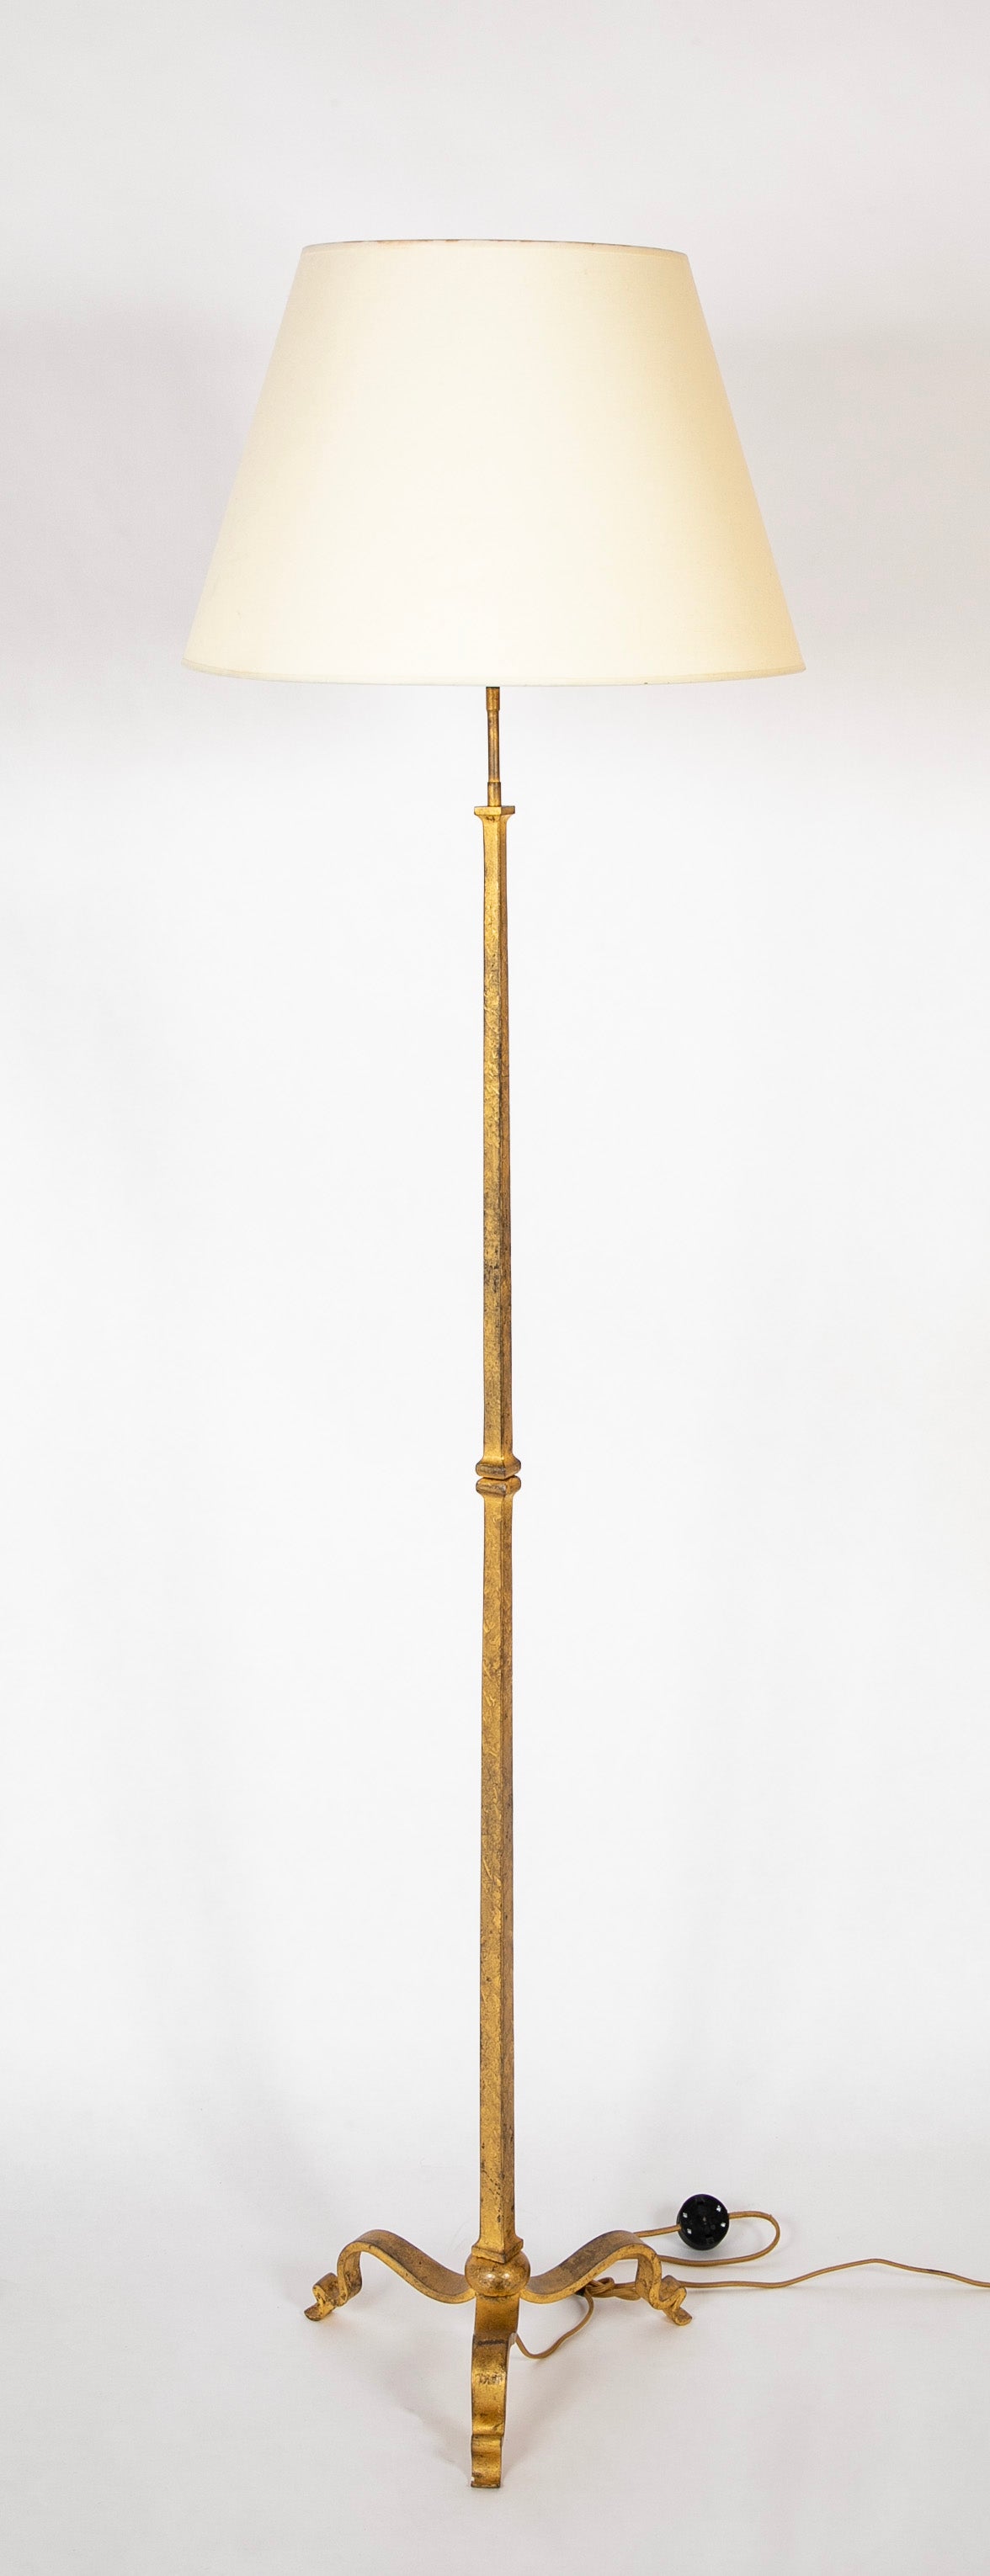 A Pair of Gilt Iron Floor Lamps